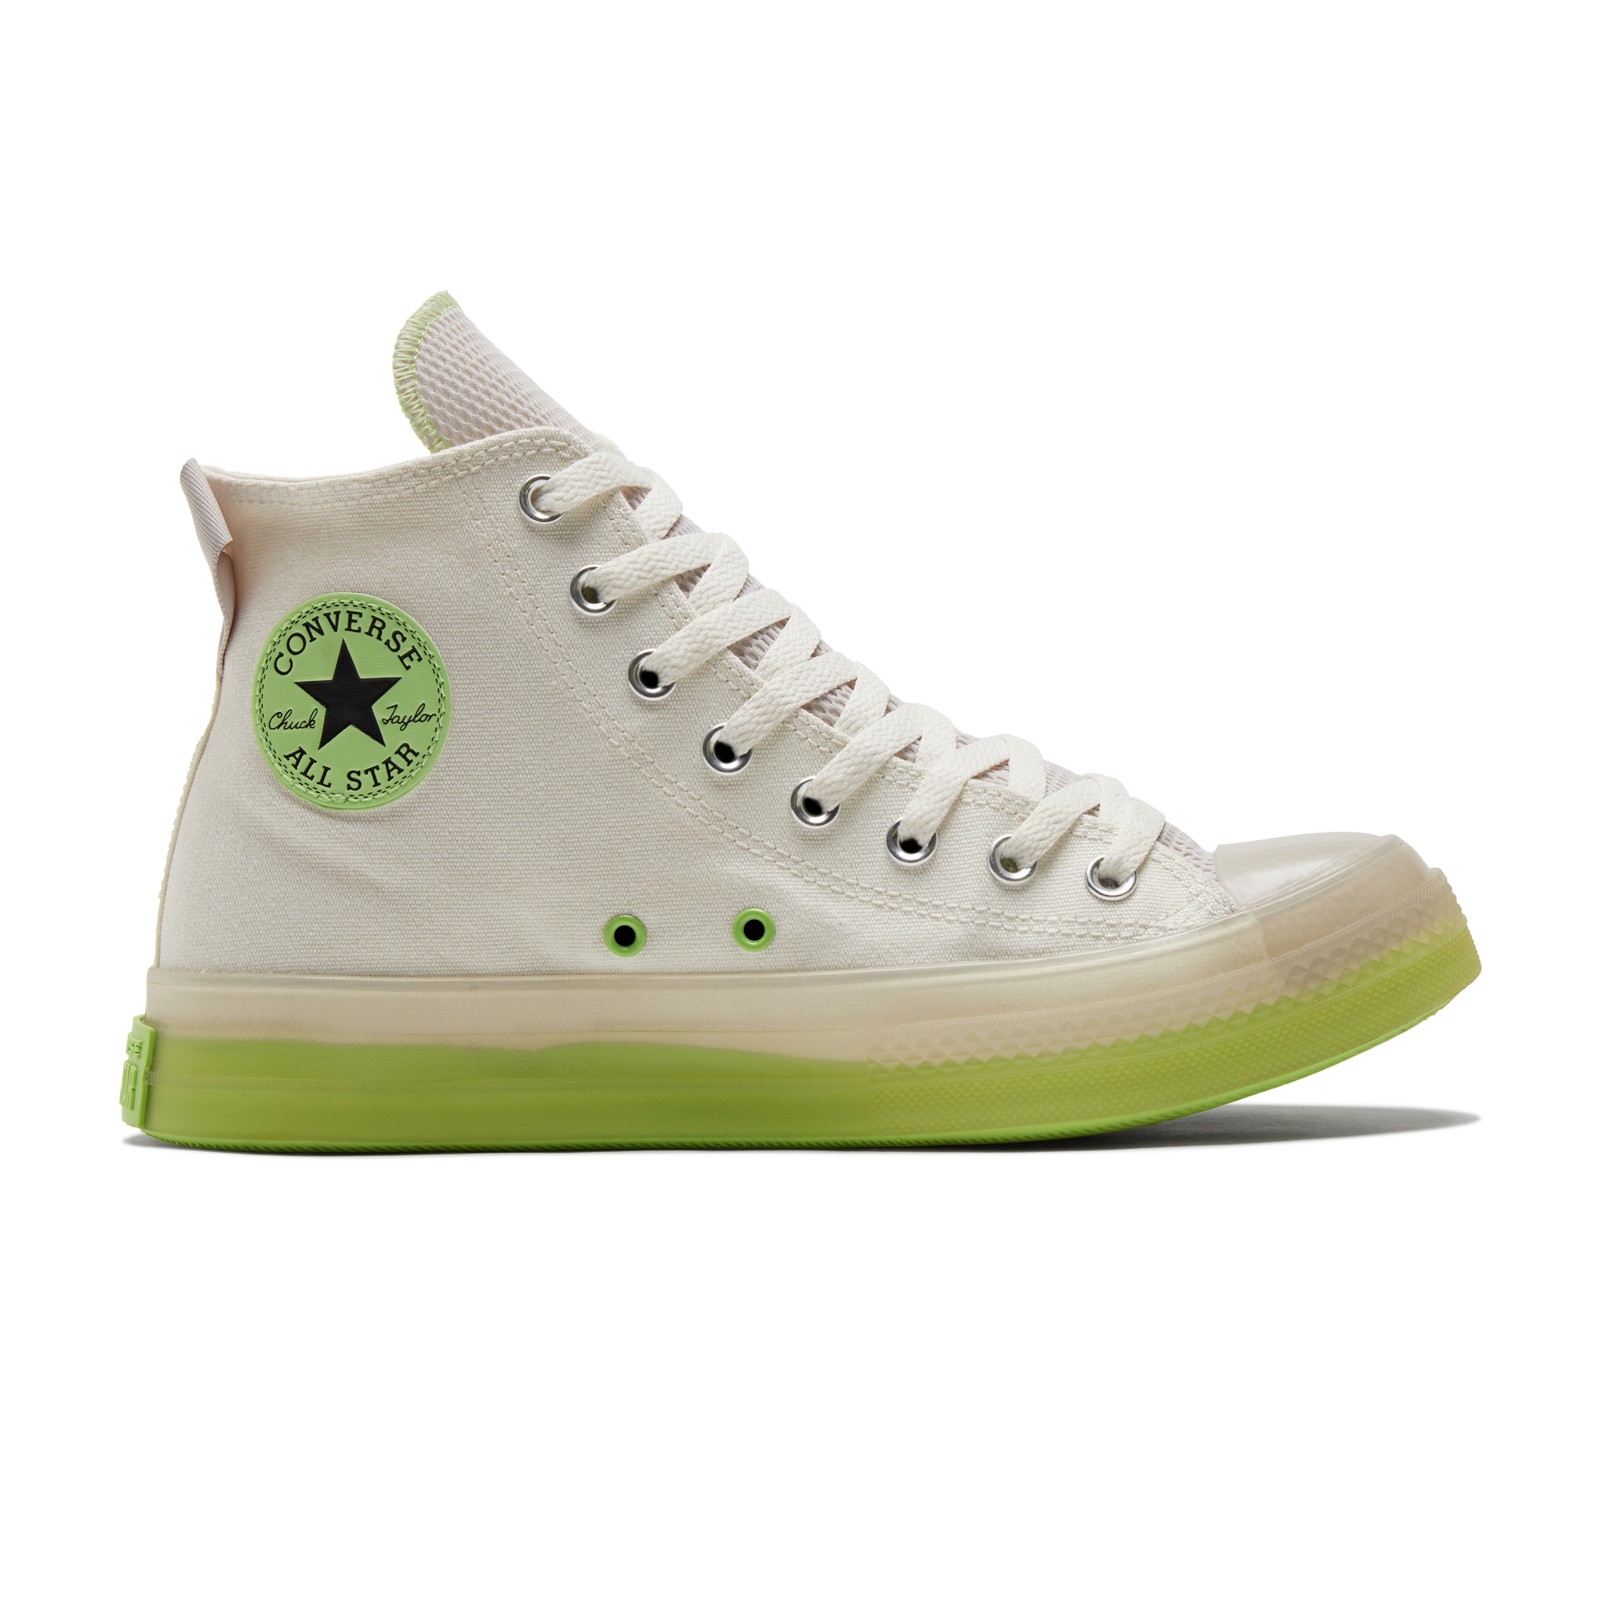 China Wholesale Supplier Branded shoes converse, join us on whatsapp | Yupoo